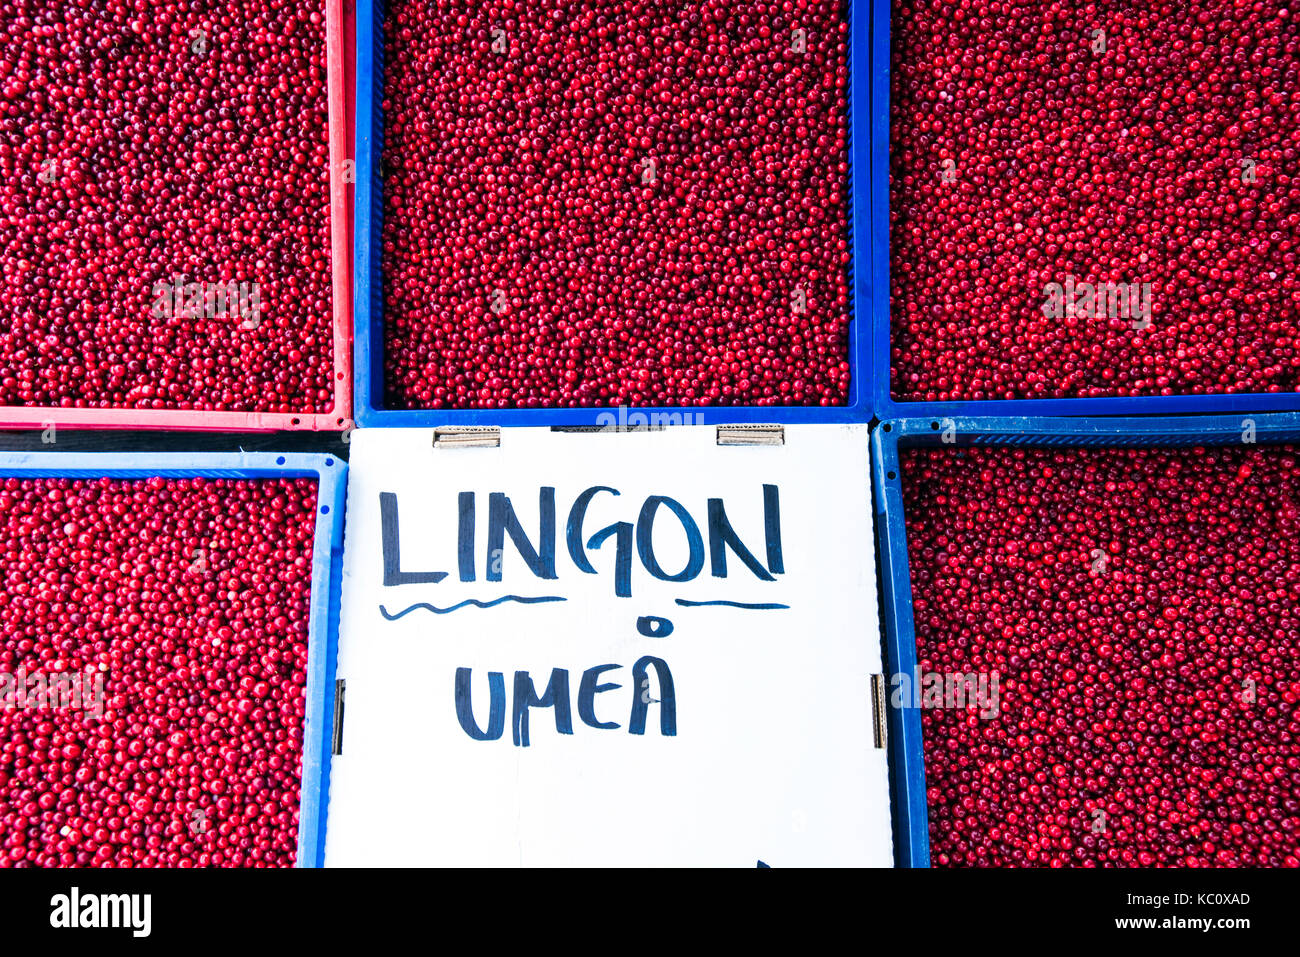 Lingon berries on sale at an outdoor market in Umea, Sweden Stock Photo